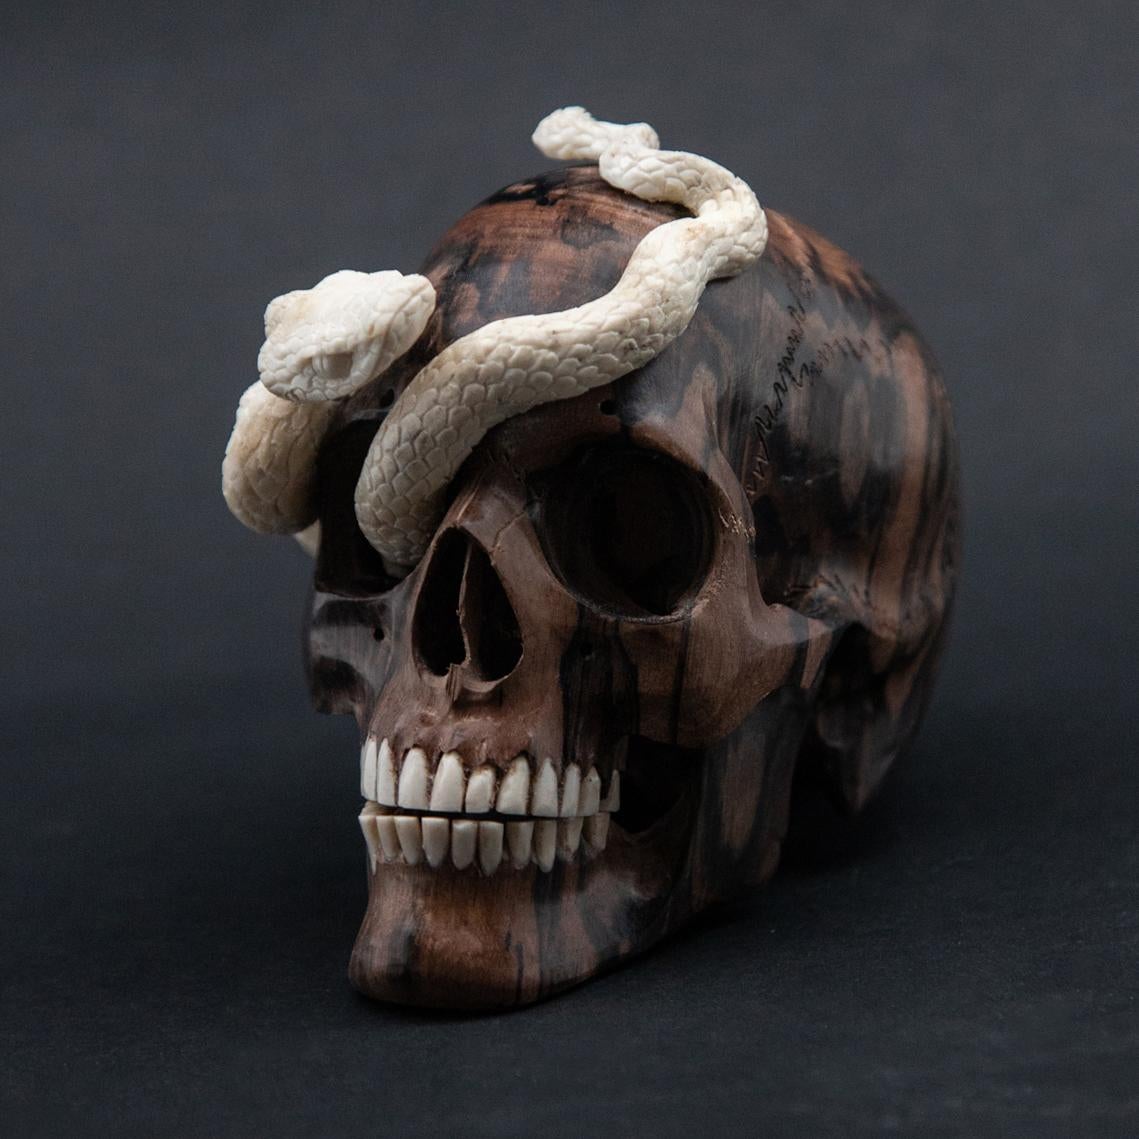 Beautifully sculpted wood skull with a carved moose antler snake. Meticulously created by skilled Indonesian artists, this is a one of a kind piece.